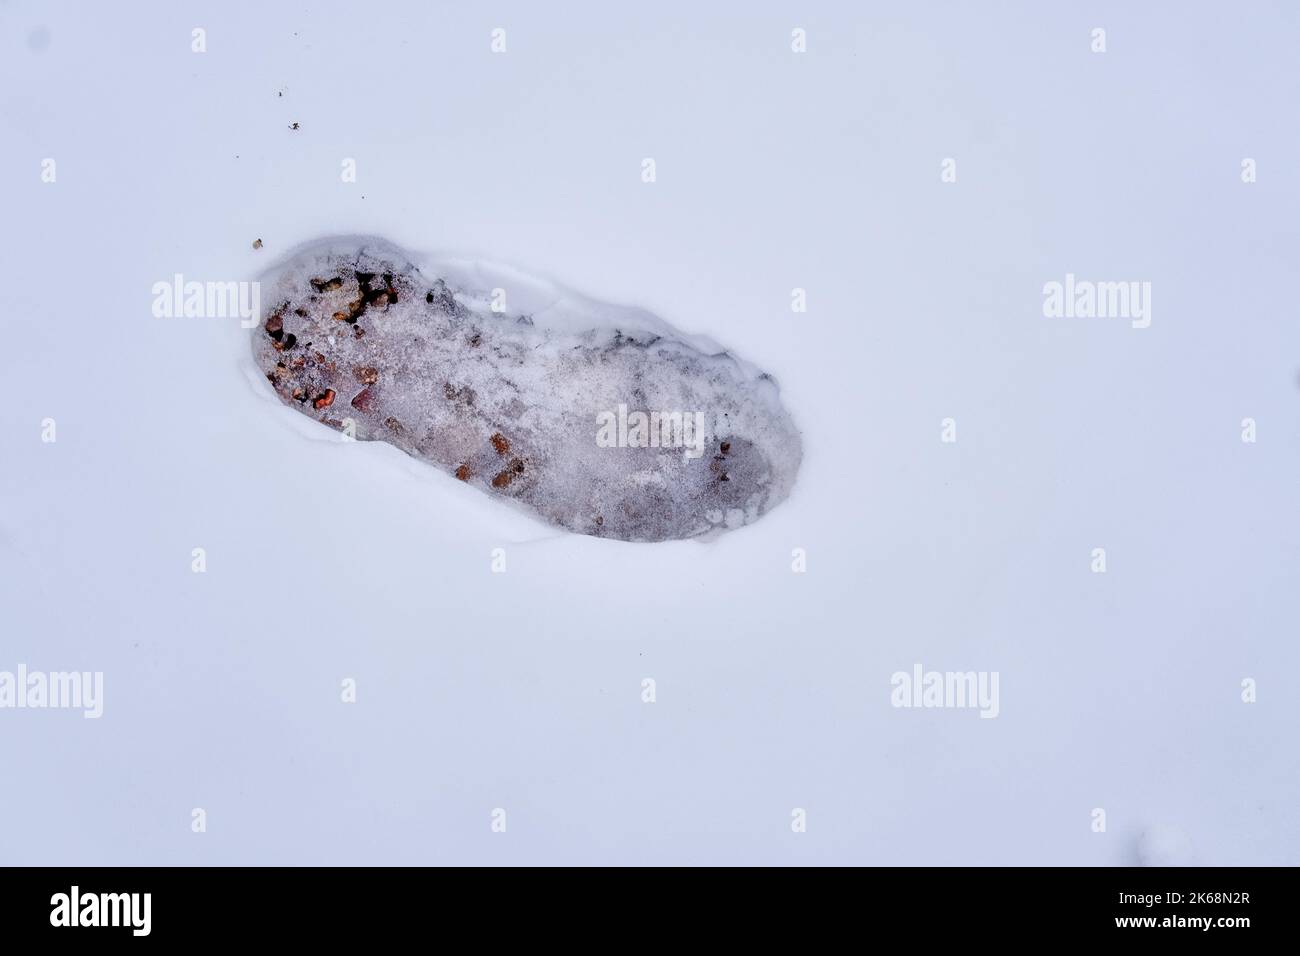 High Angle View Of an isolated Footprint Of a Boot On Fresh Snow. Copy space Stock Photo